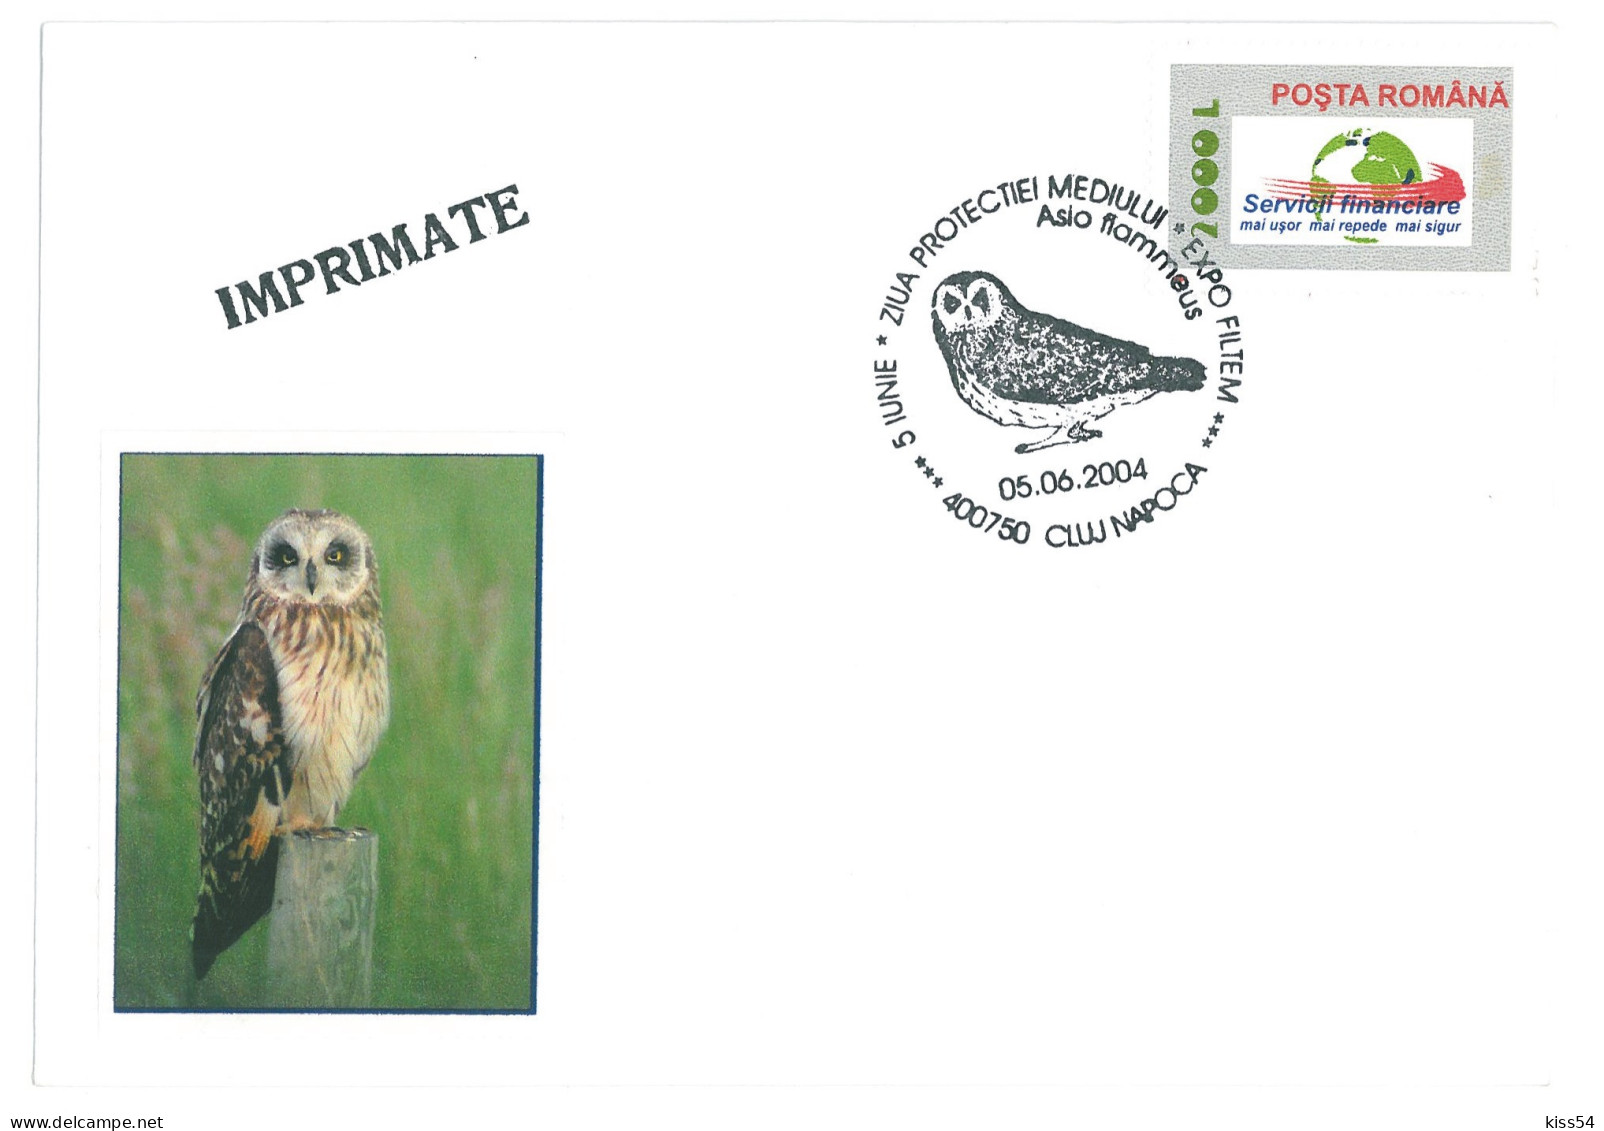 COV 995 - 3141 OWLS, Romania - Cover - Used - 2004 - Covers & Documents